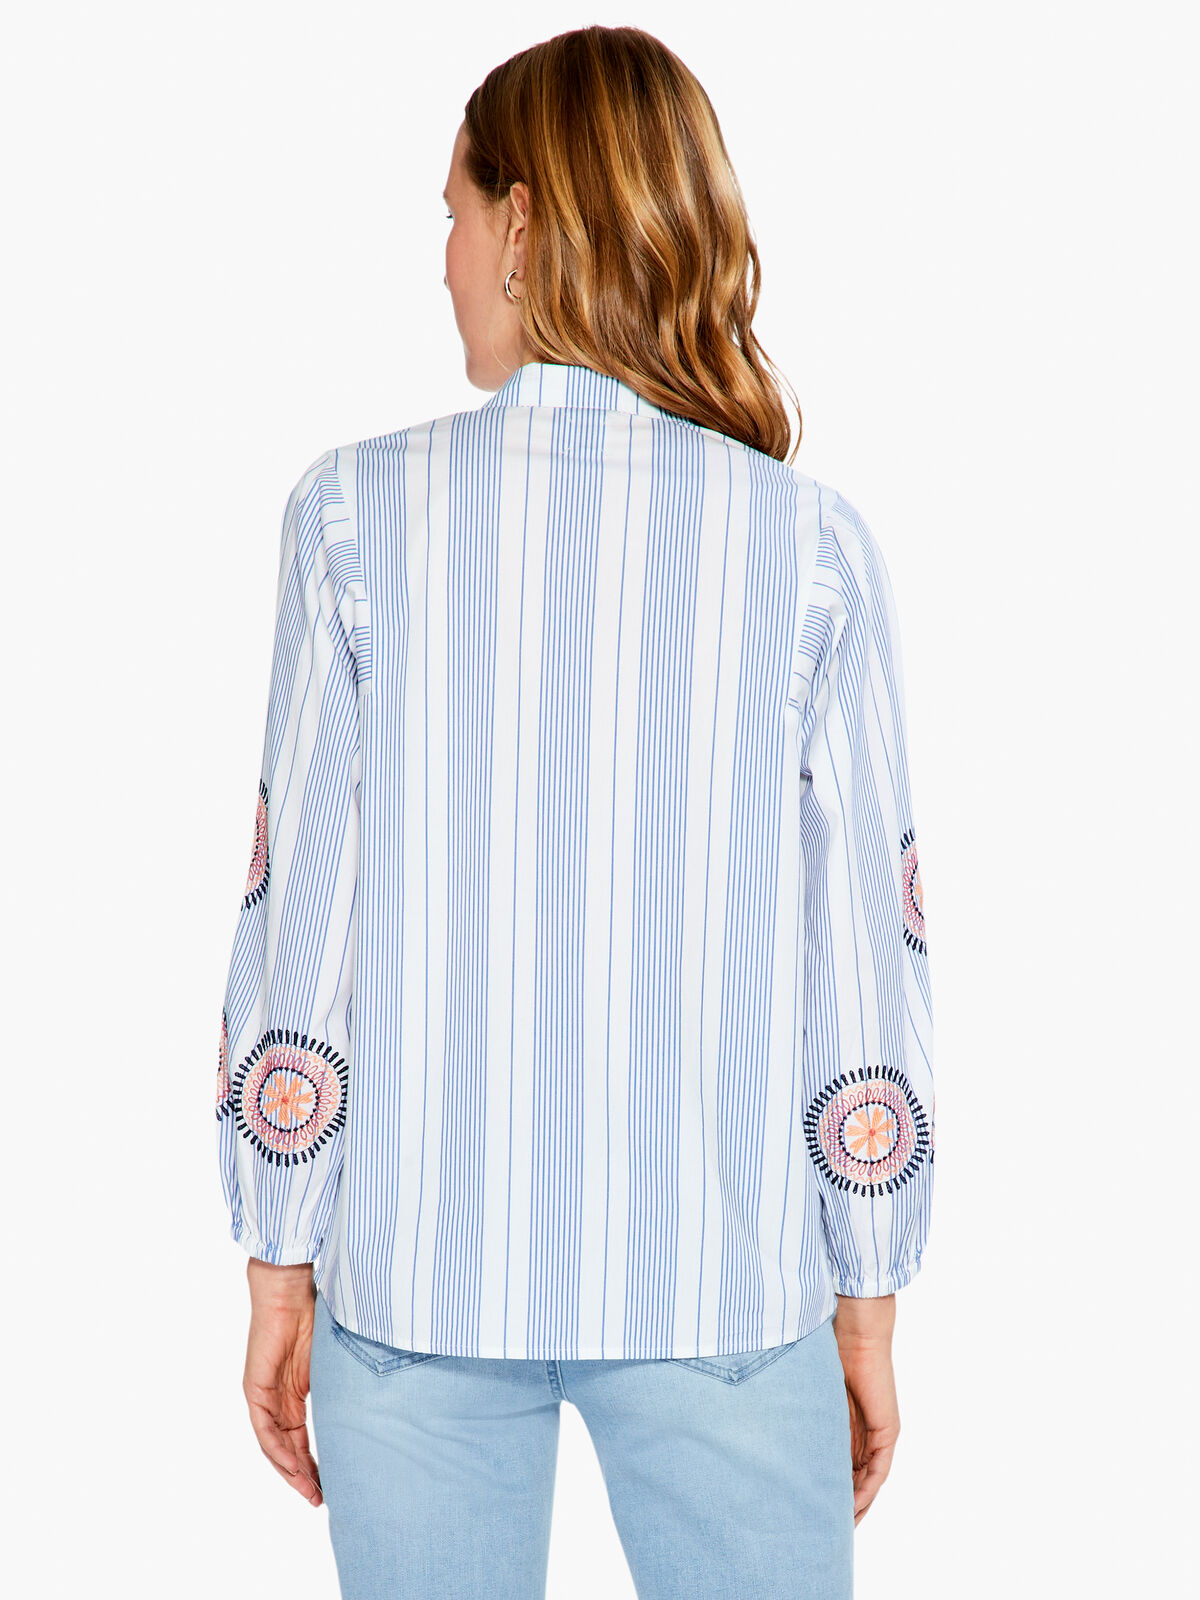 Embroidered Skies Shirt